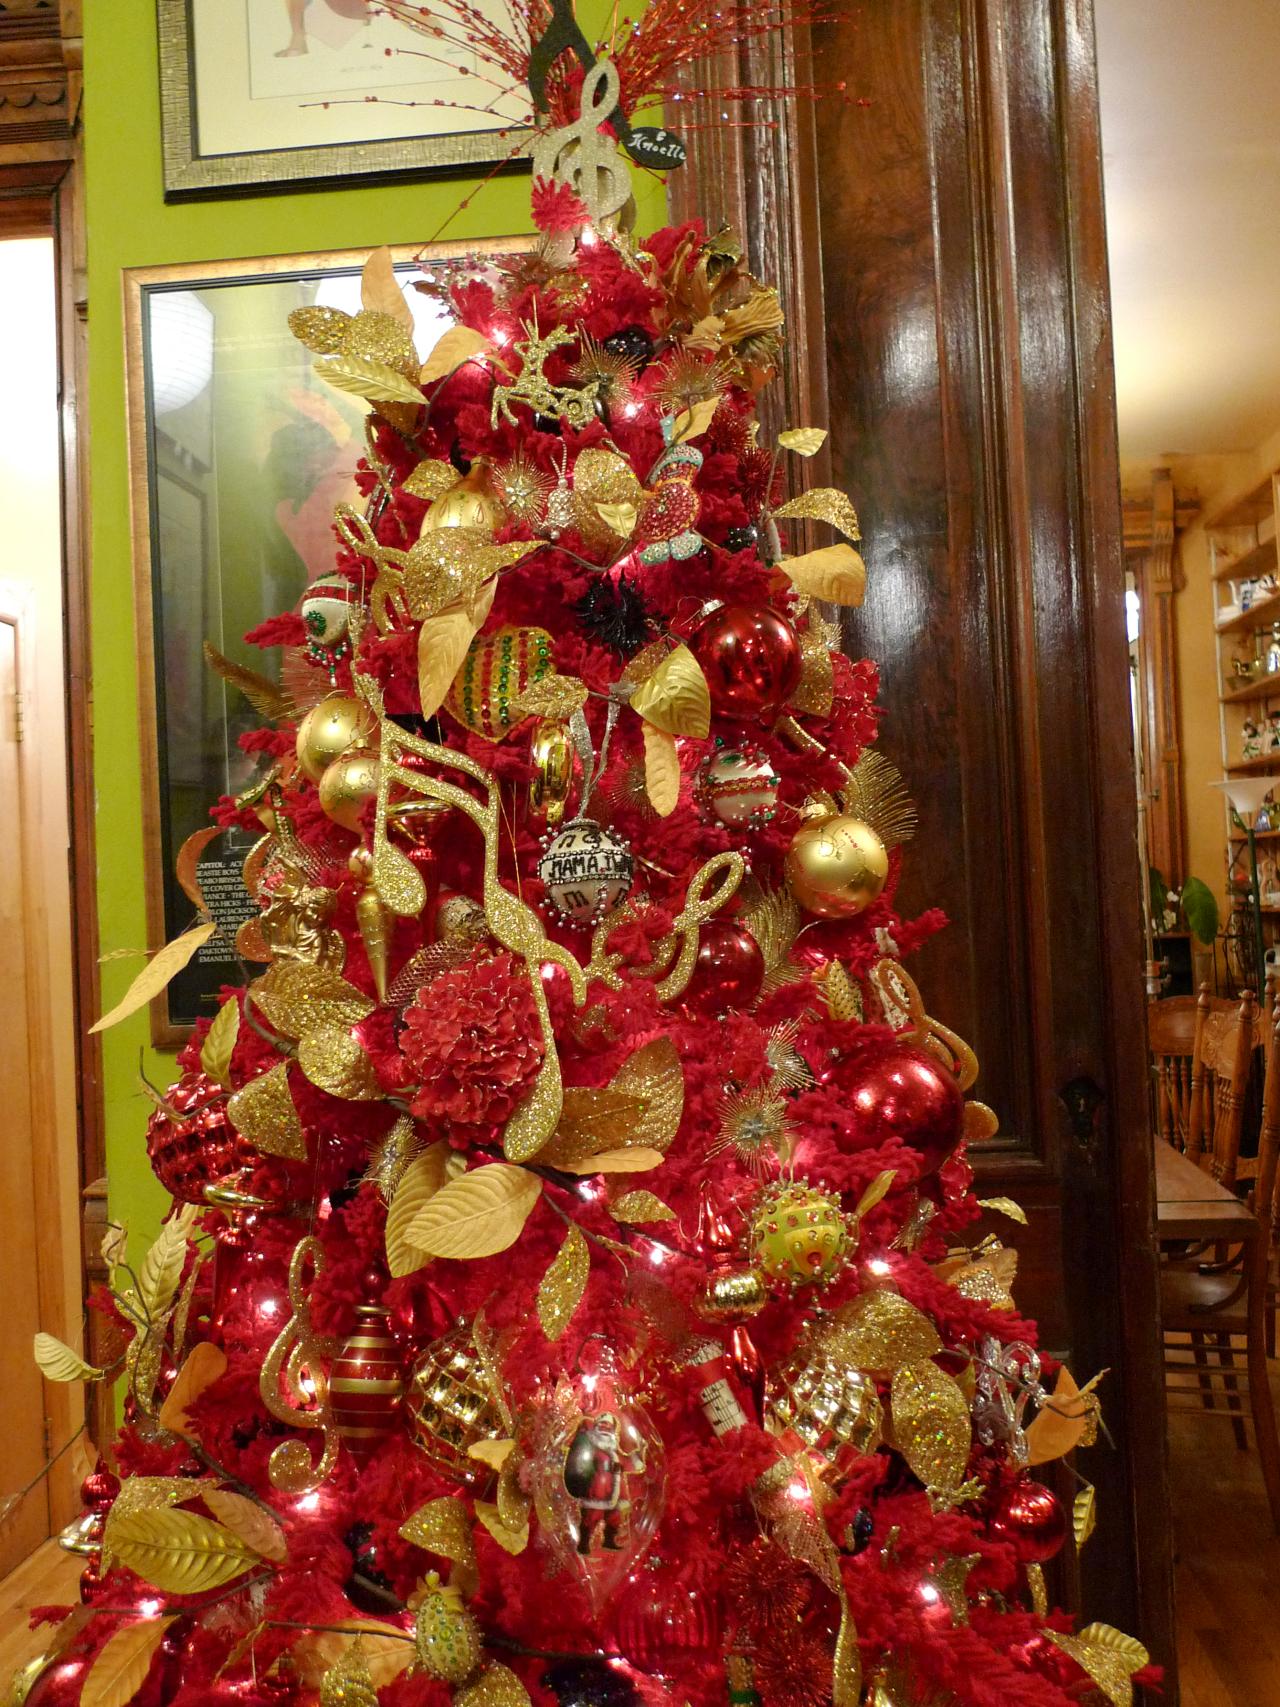 40 Gold Christmas Tree Decorations Ideas For Coming Holiday Session - Decoration Love